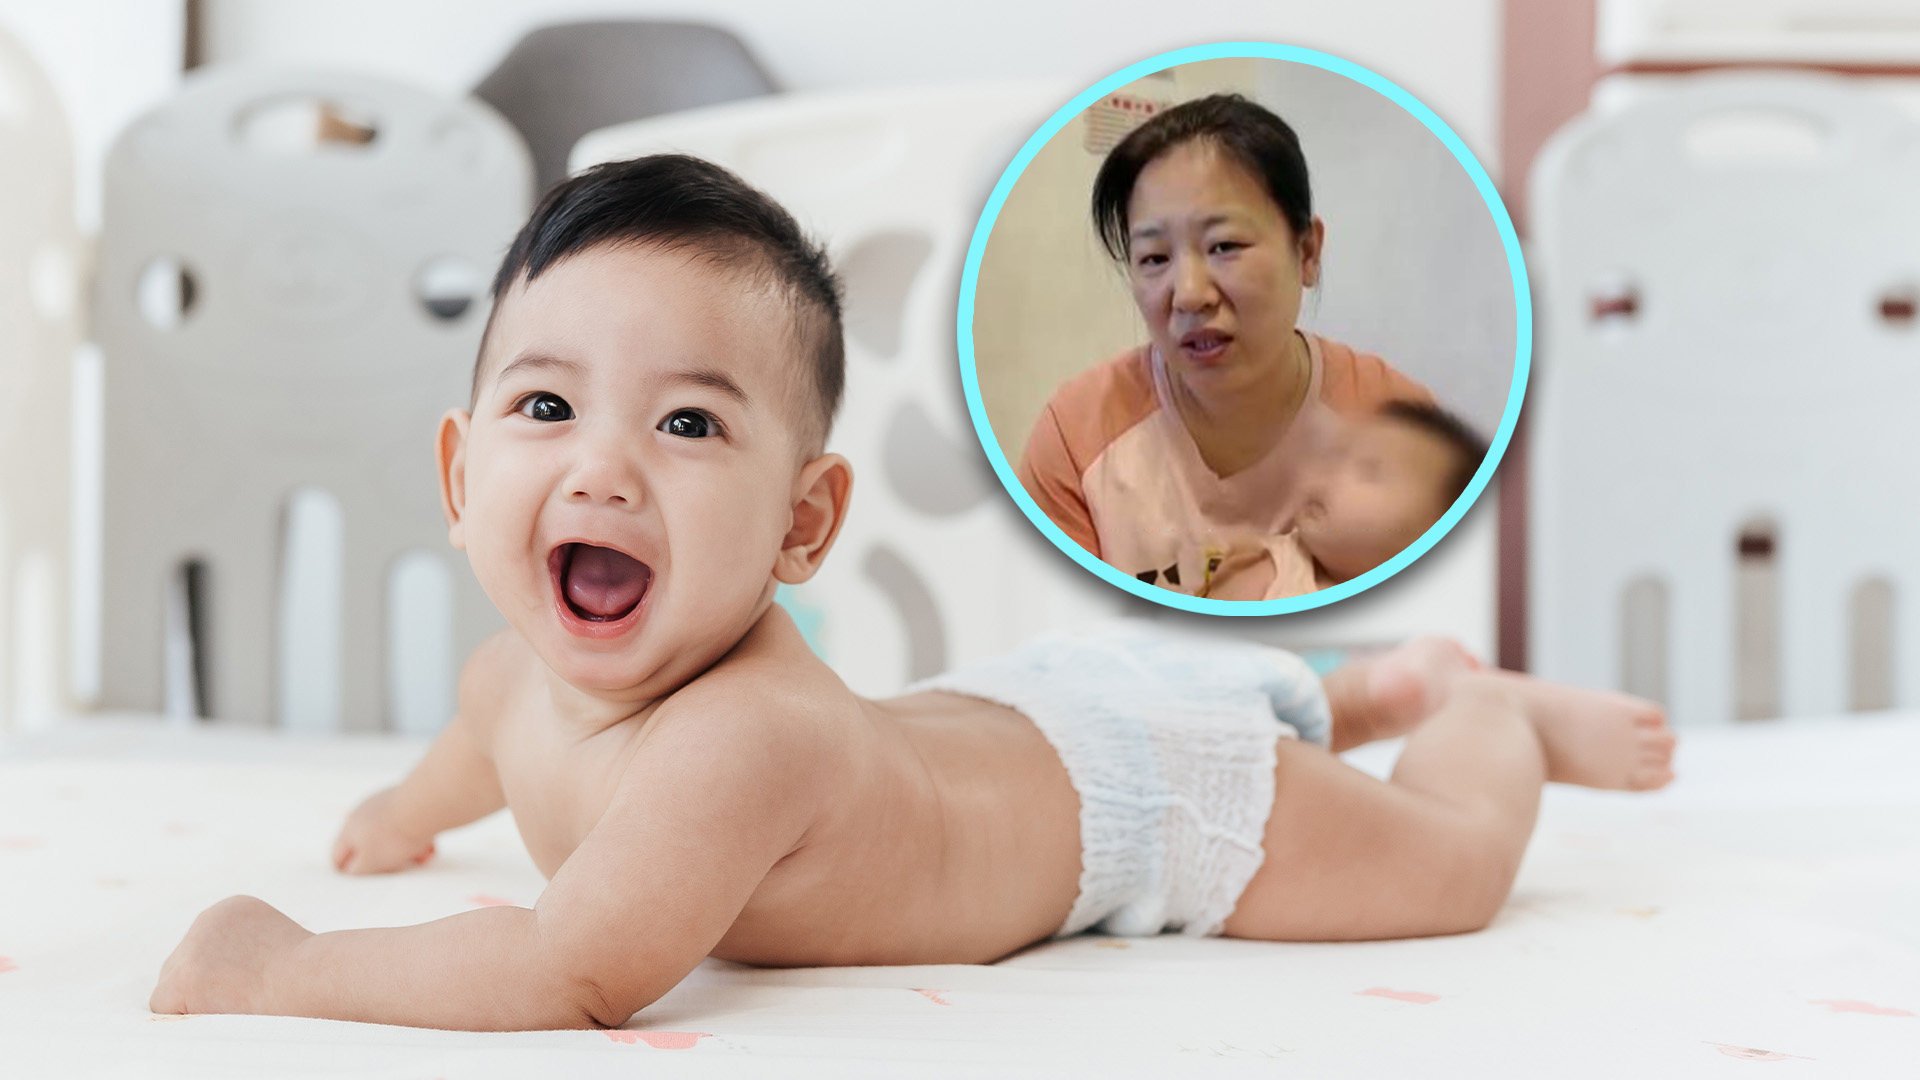 A couple in China have vanished, leaving their nanny with a baby, after claiming they were about to receive a US$56 million inheritance from the woman’s ex-partner. Photo: SCMP composite/Shutterstock/Douyin